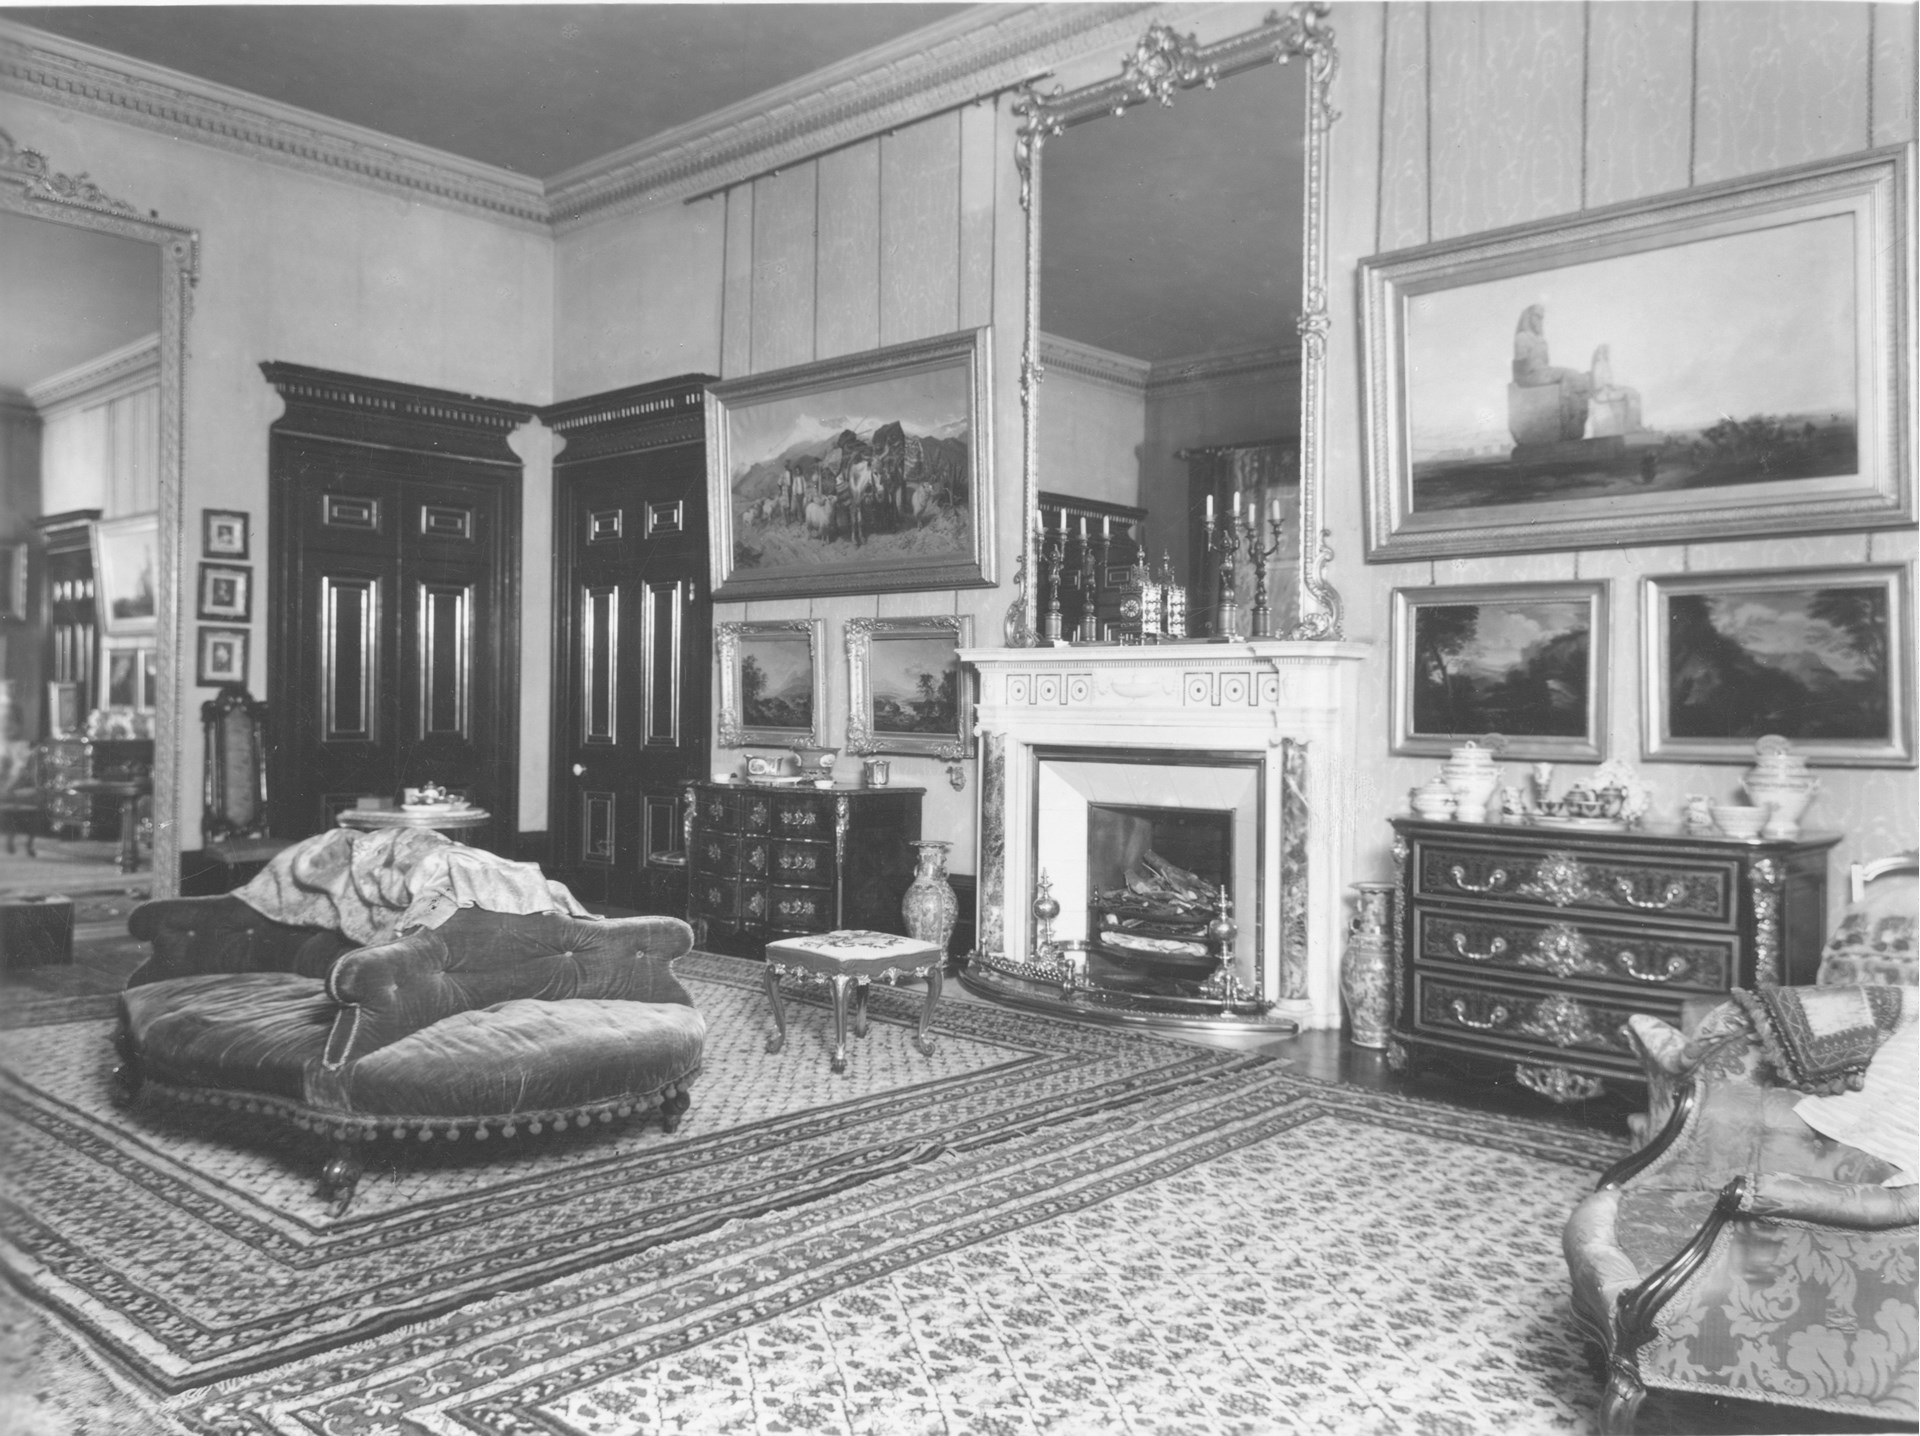 The Drawing Room, from 1935.